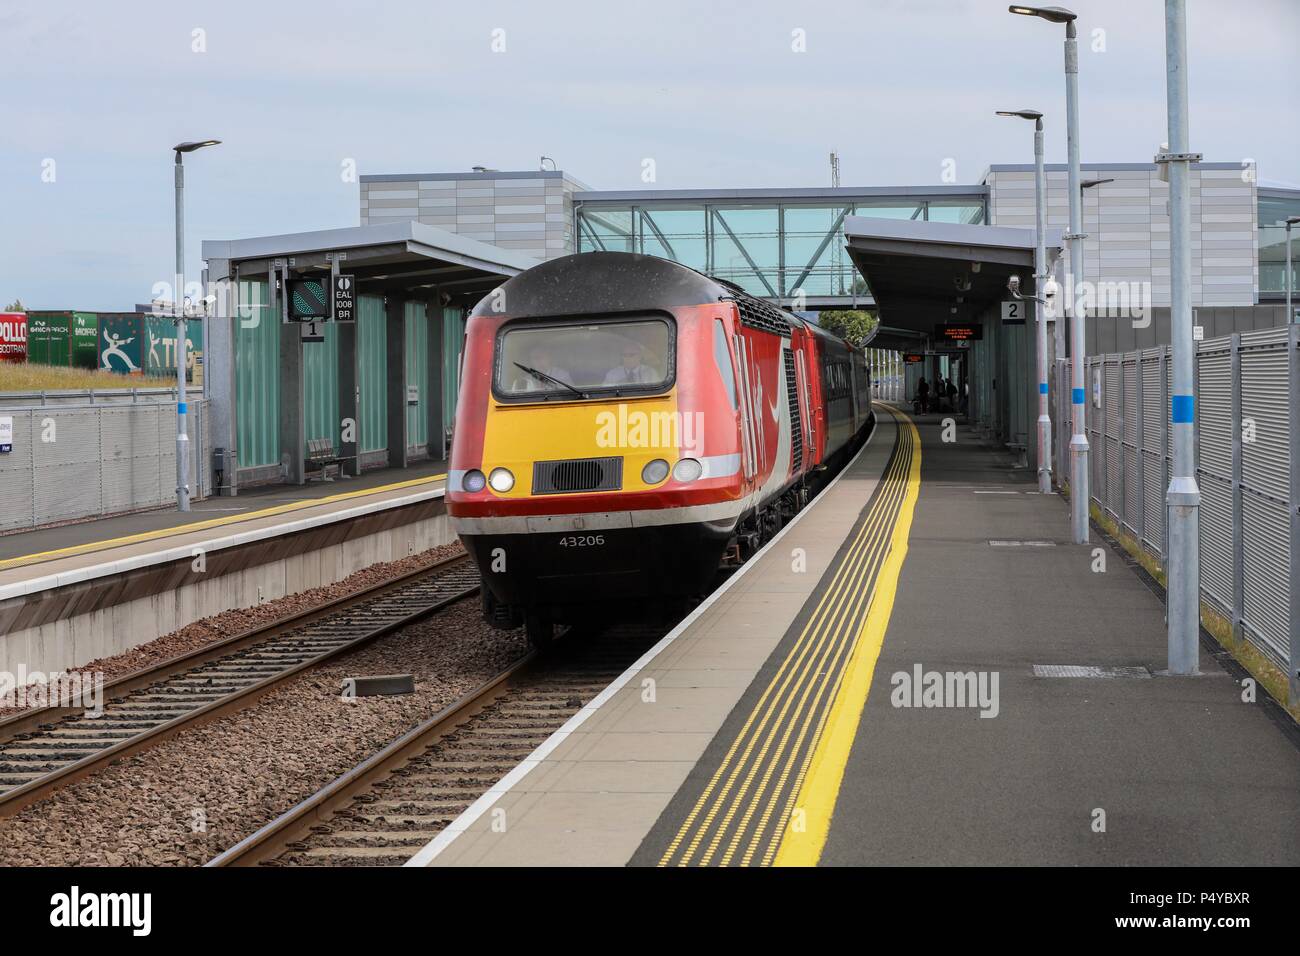 Edinburgh, UK. 23rd March 2018.  A Virgin Trains East Coast Service thunders through Edinburgh Gateway station bound for Aberdeen. This HST 43206 is one of the last services to run on the East Coast mainline before the franchise is taken over officially by LNER on 23rd June 2018. Due to operational difficulties the government has taken back control of this rail franchise which was operated by Stagecoach and Virgin. © Garry Cornes / Alamy Live News Stock Photo